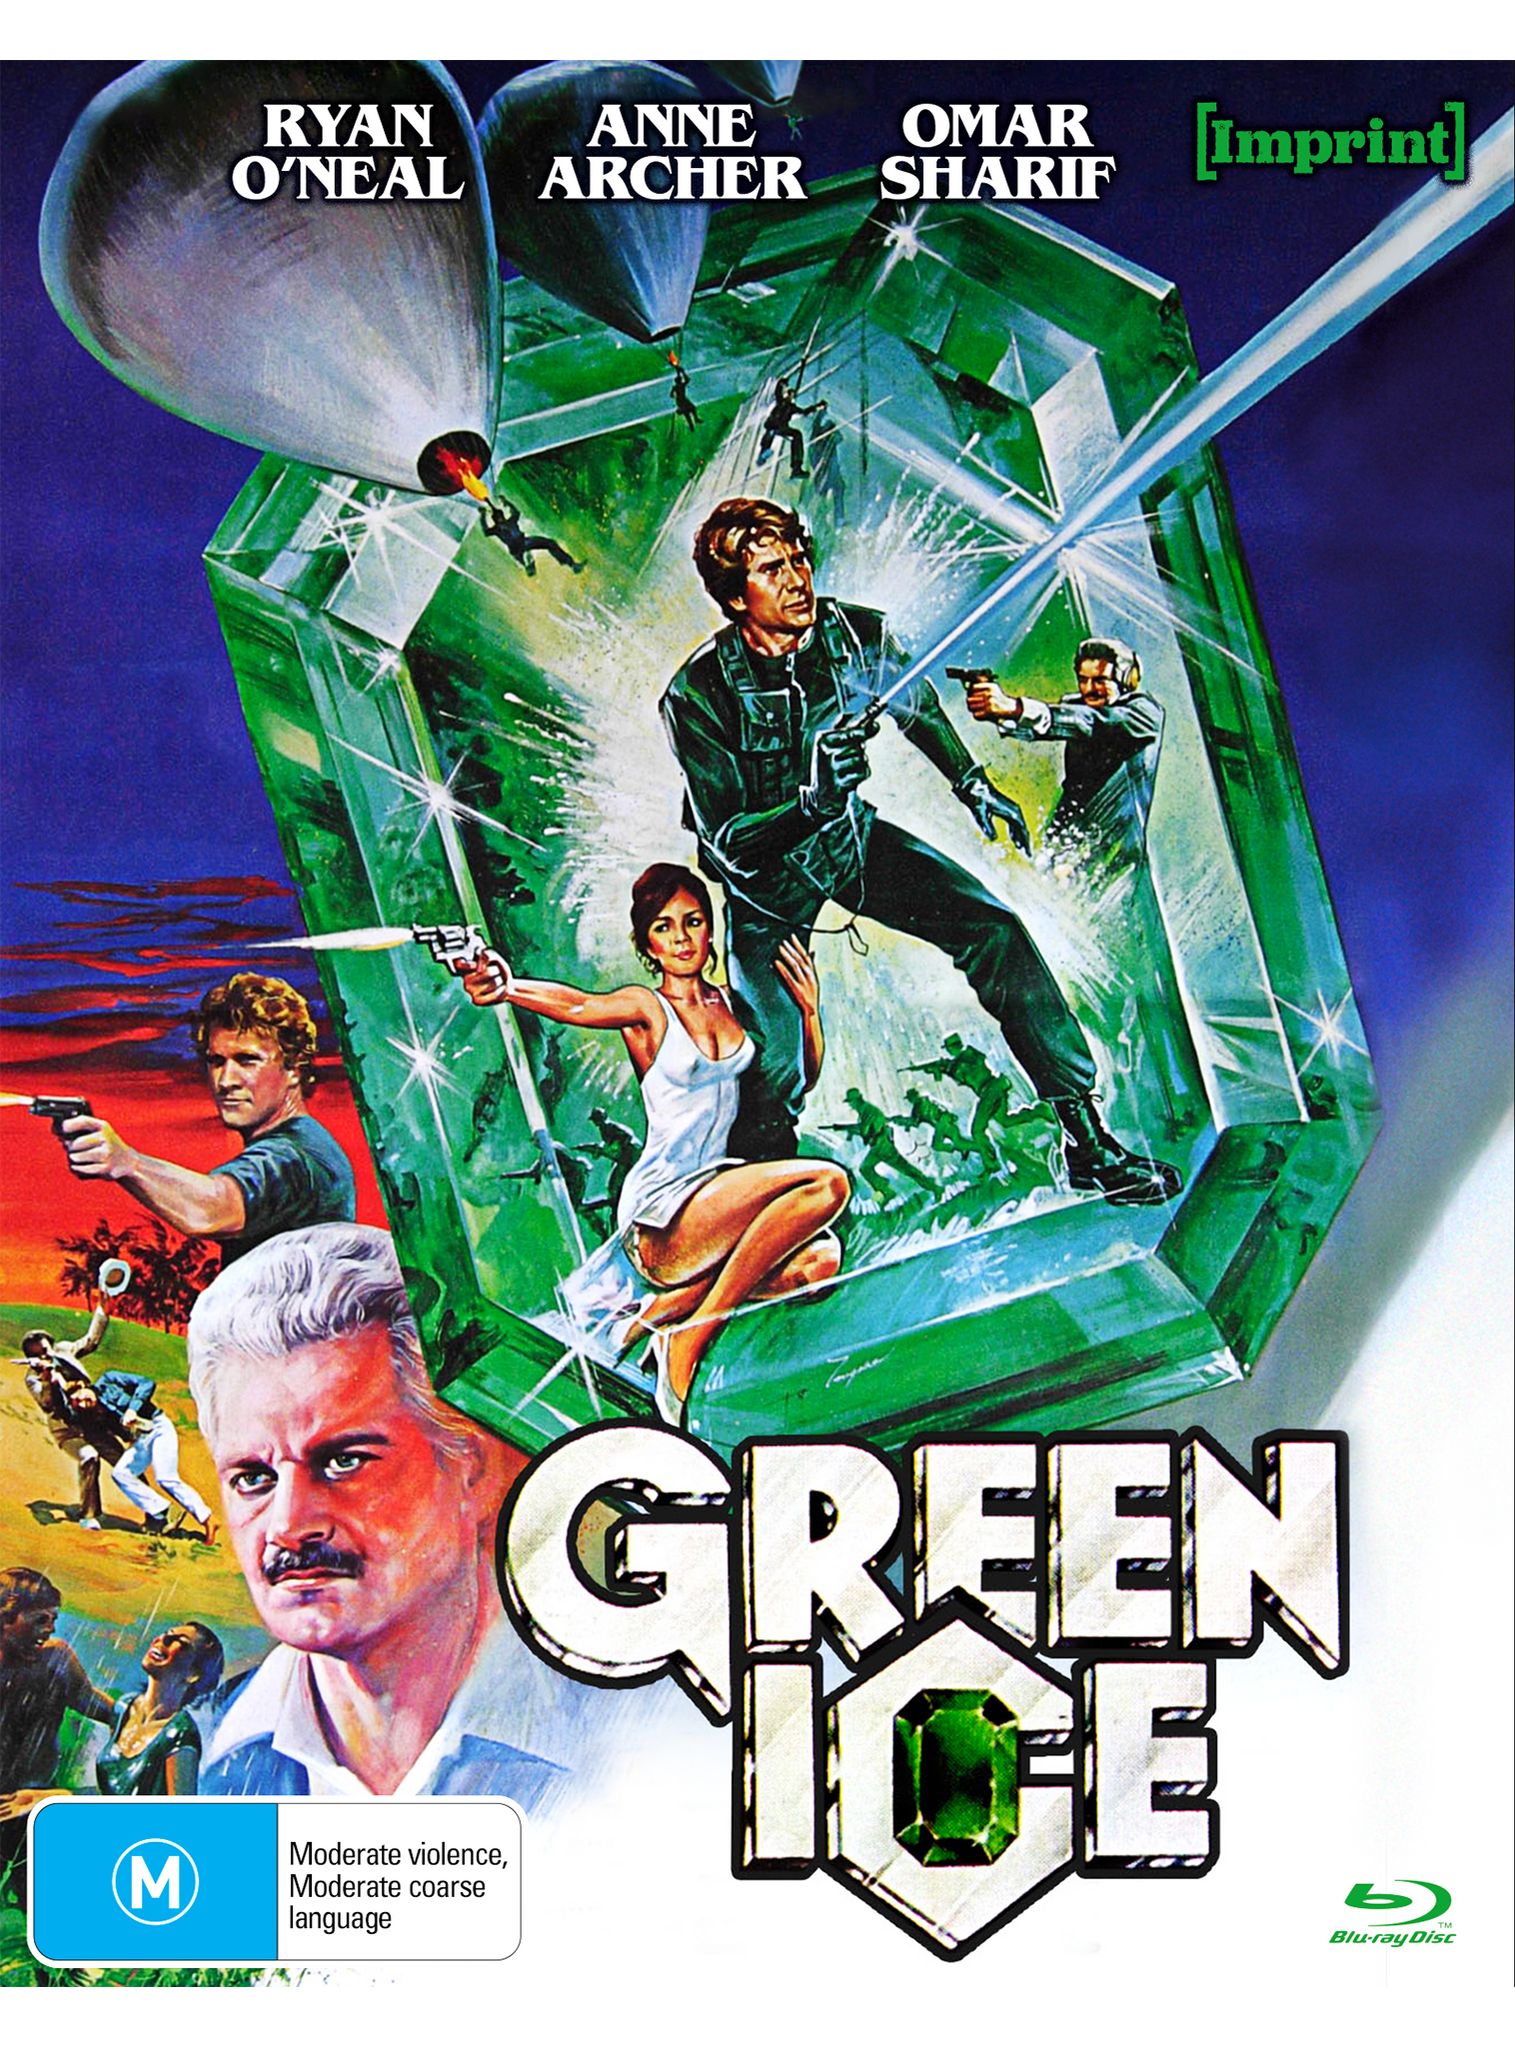 GREEN ICE (IMPRINT COLLECTION #295) - BLU-RAY